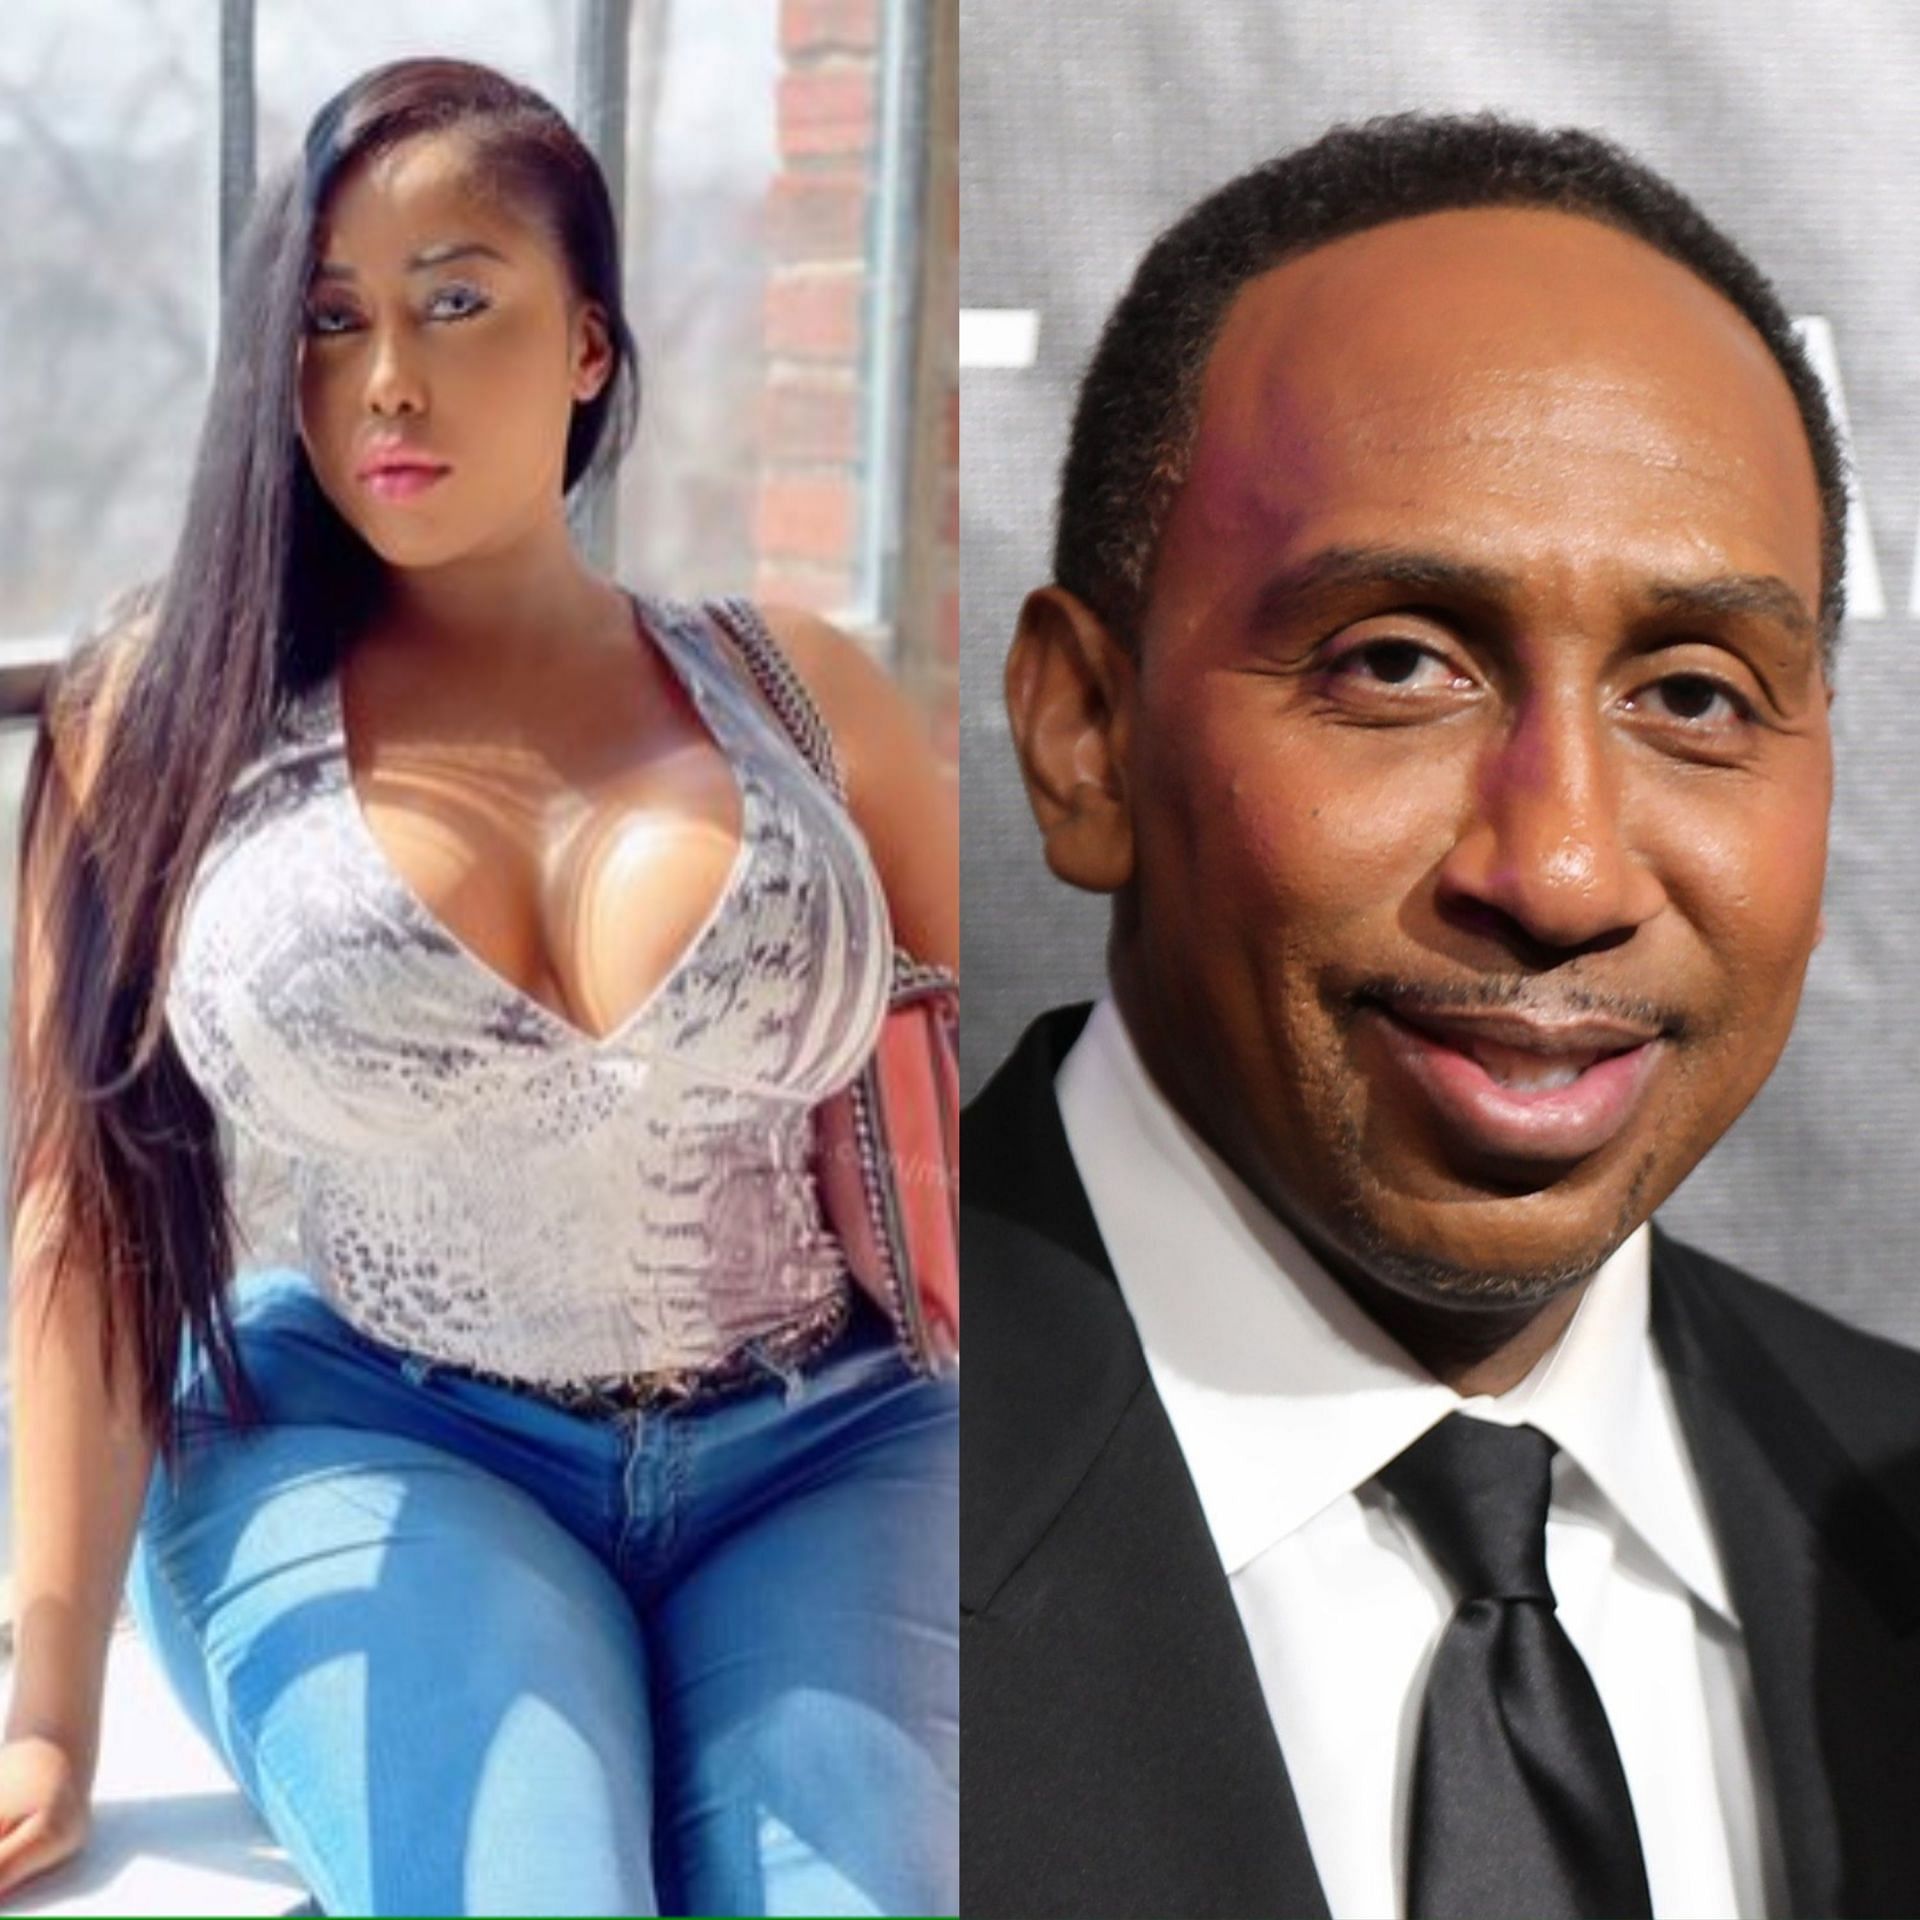 “Moriah Mills has entered my live YouTube chat” Stephen A. Smith